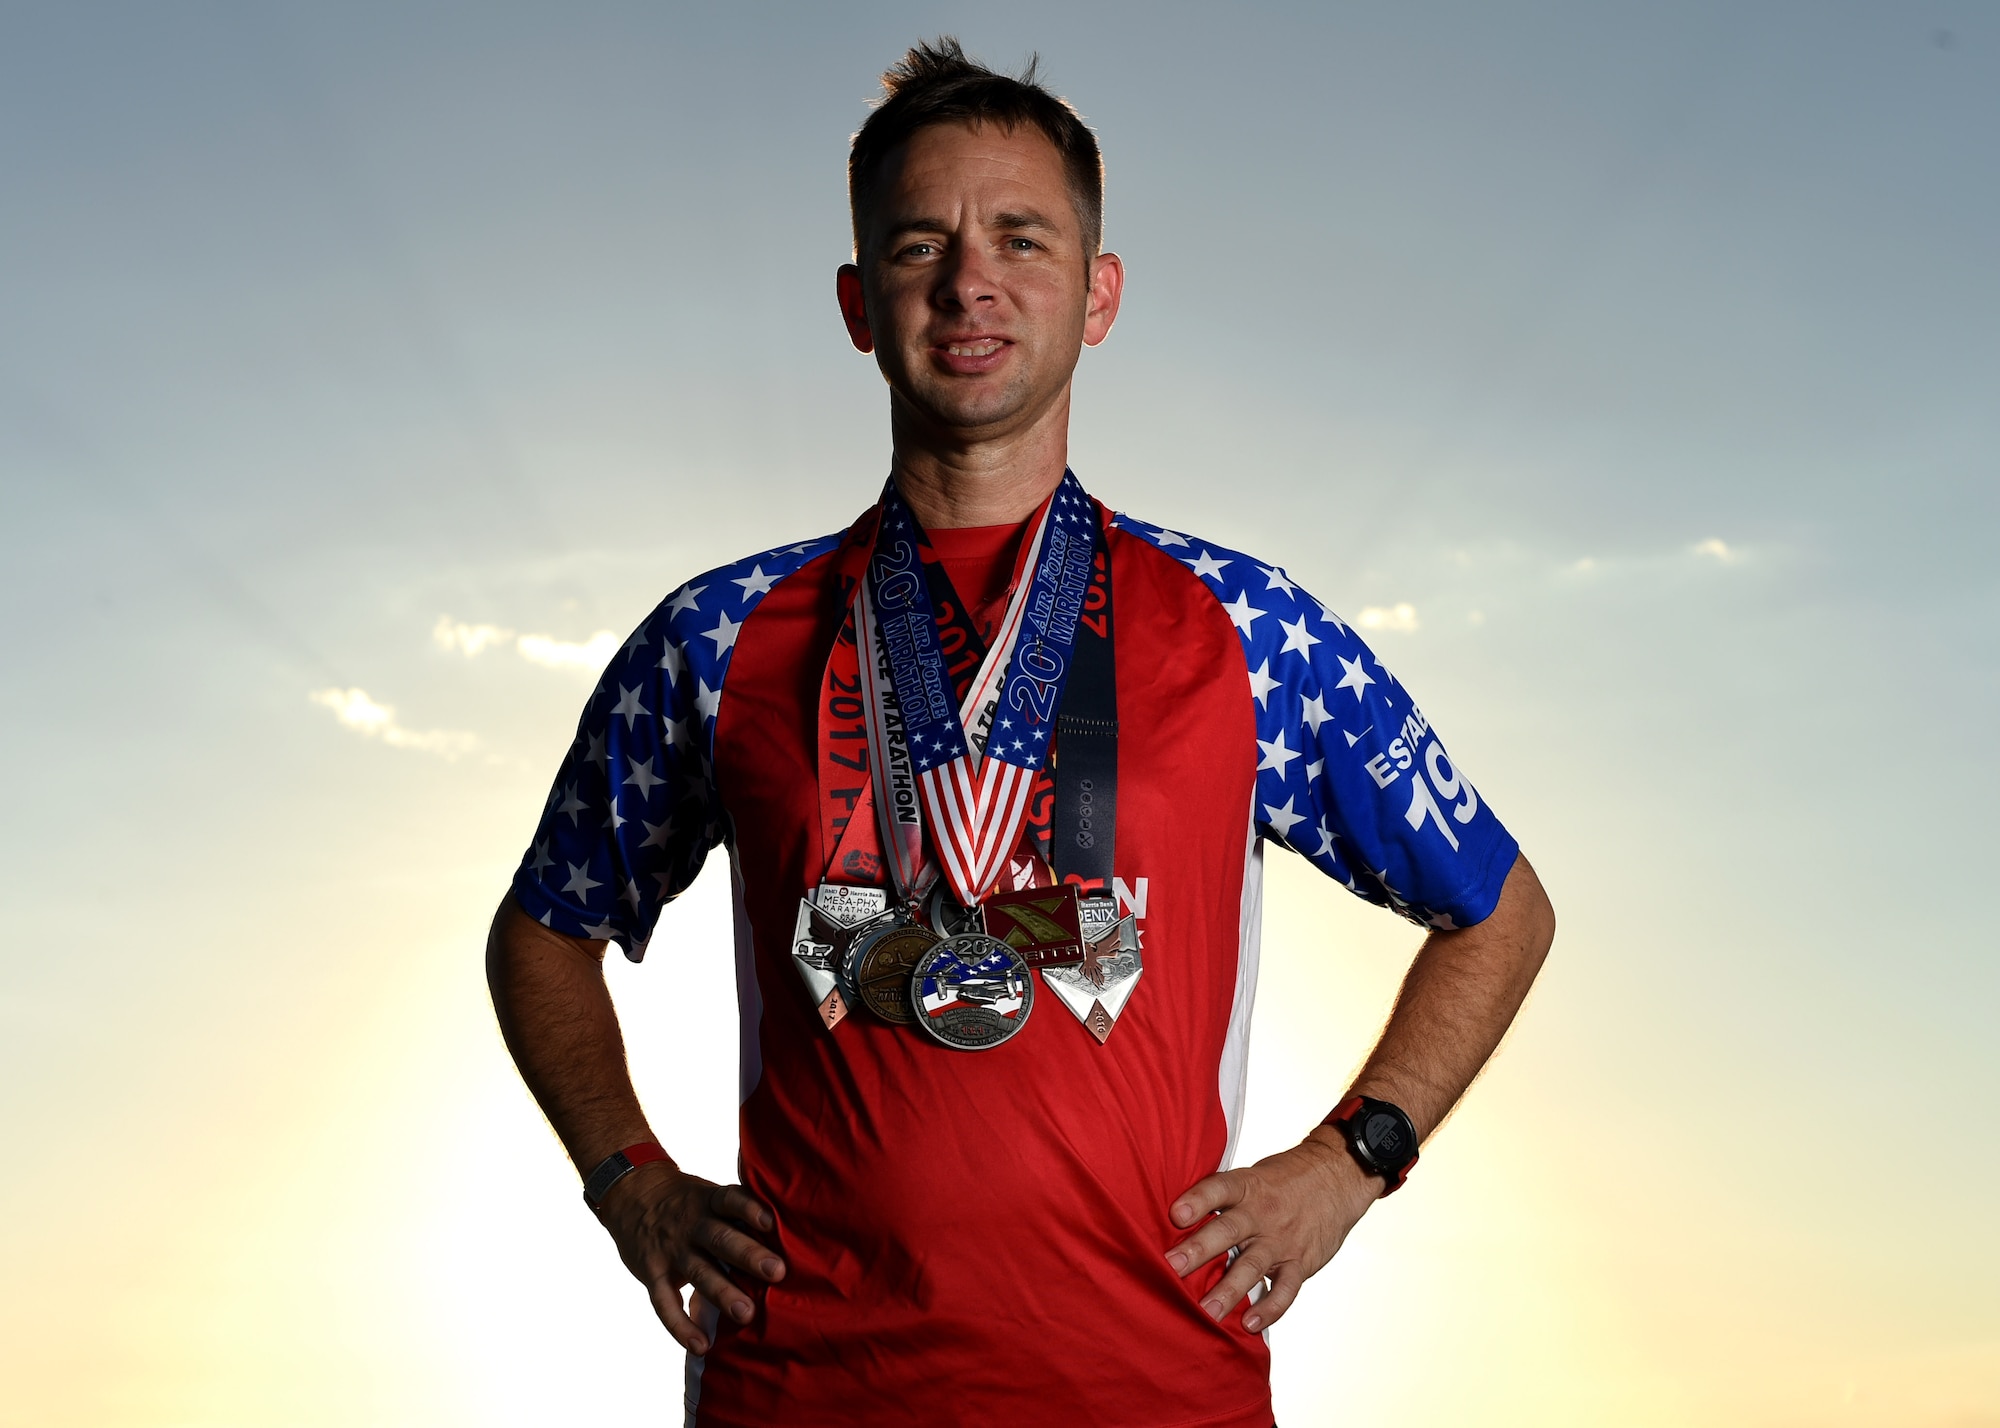 U.S. Air Force Tech. Sgt. Logan Berry, 54th Air Refueling Squadron instructor boom operator, poses while wearing his long-distance running medals, July 20, 2017 at Altus, Oklahoma. After an unsuccessful running portion of a physical training test, Berry motivated himself to become a better runner and has competed in several long-distance running events, including the Air Force Marathon. (U.S. Air Force photo by Senior Airman Kirby Turbak/Released)